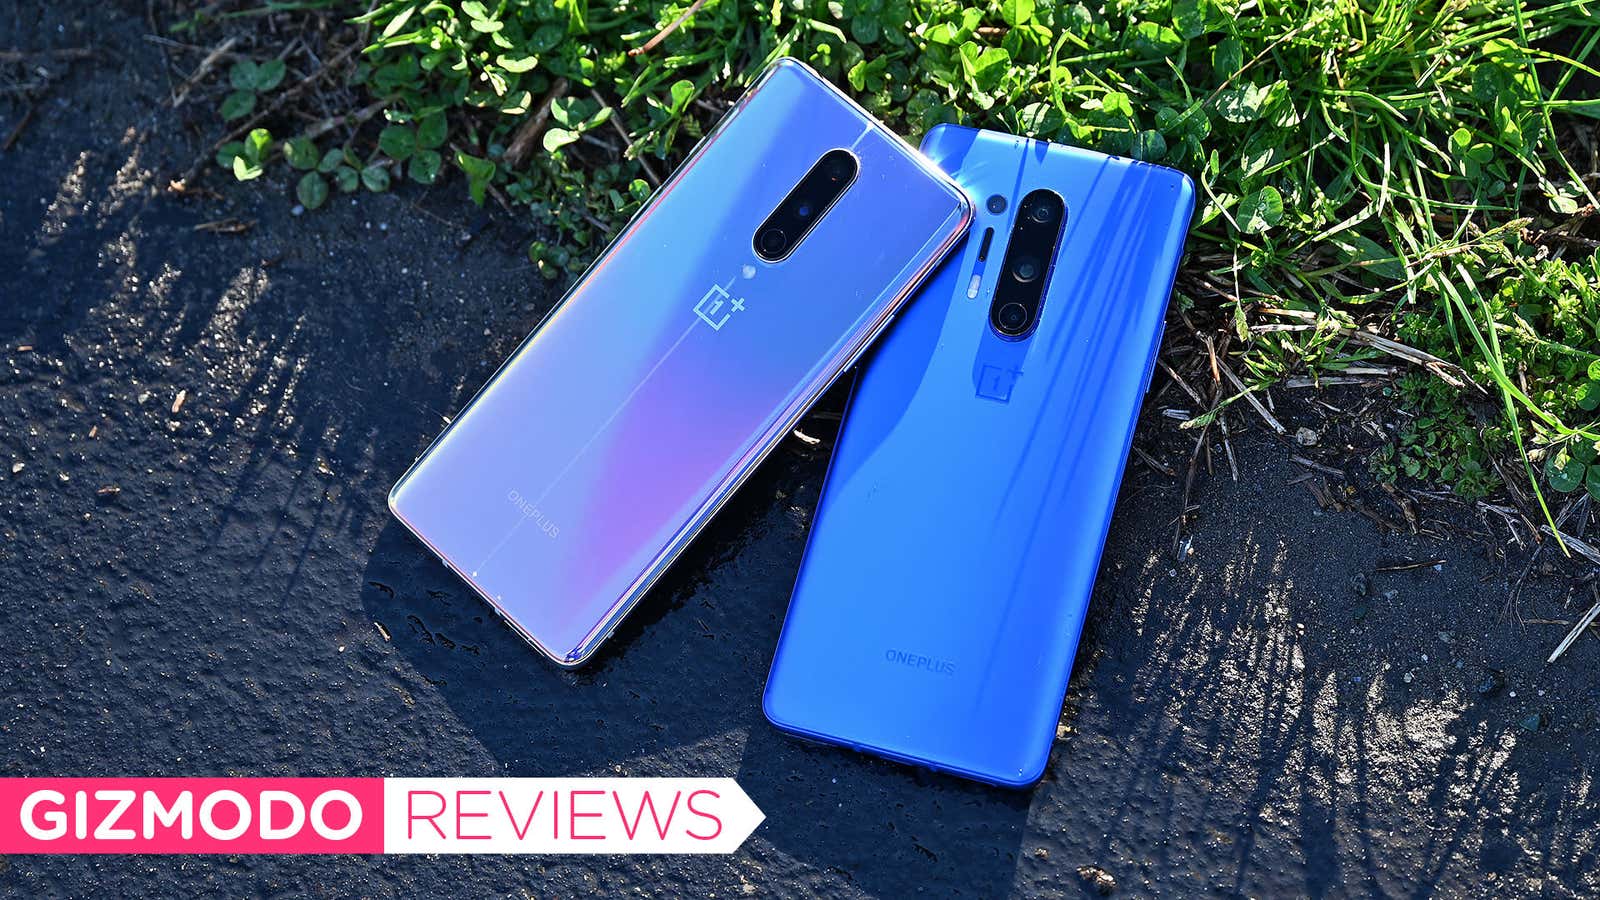 OnePlus 8 Review: This Is the Android Phone for Most People